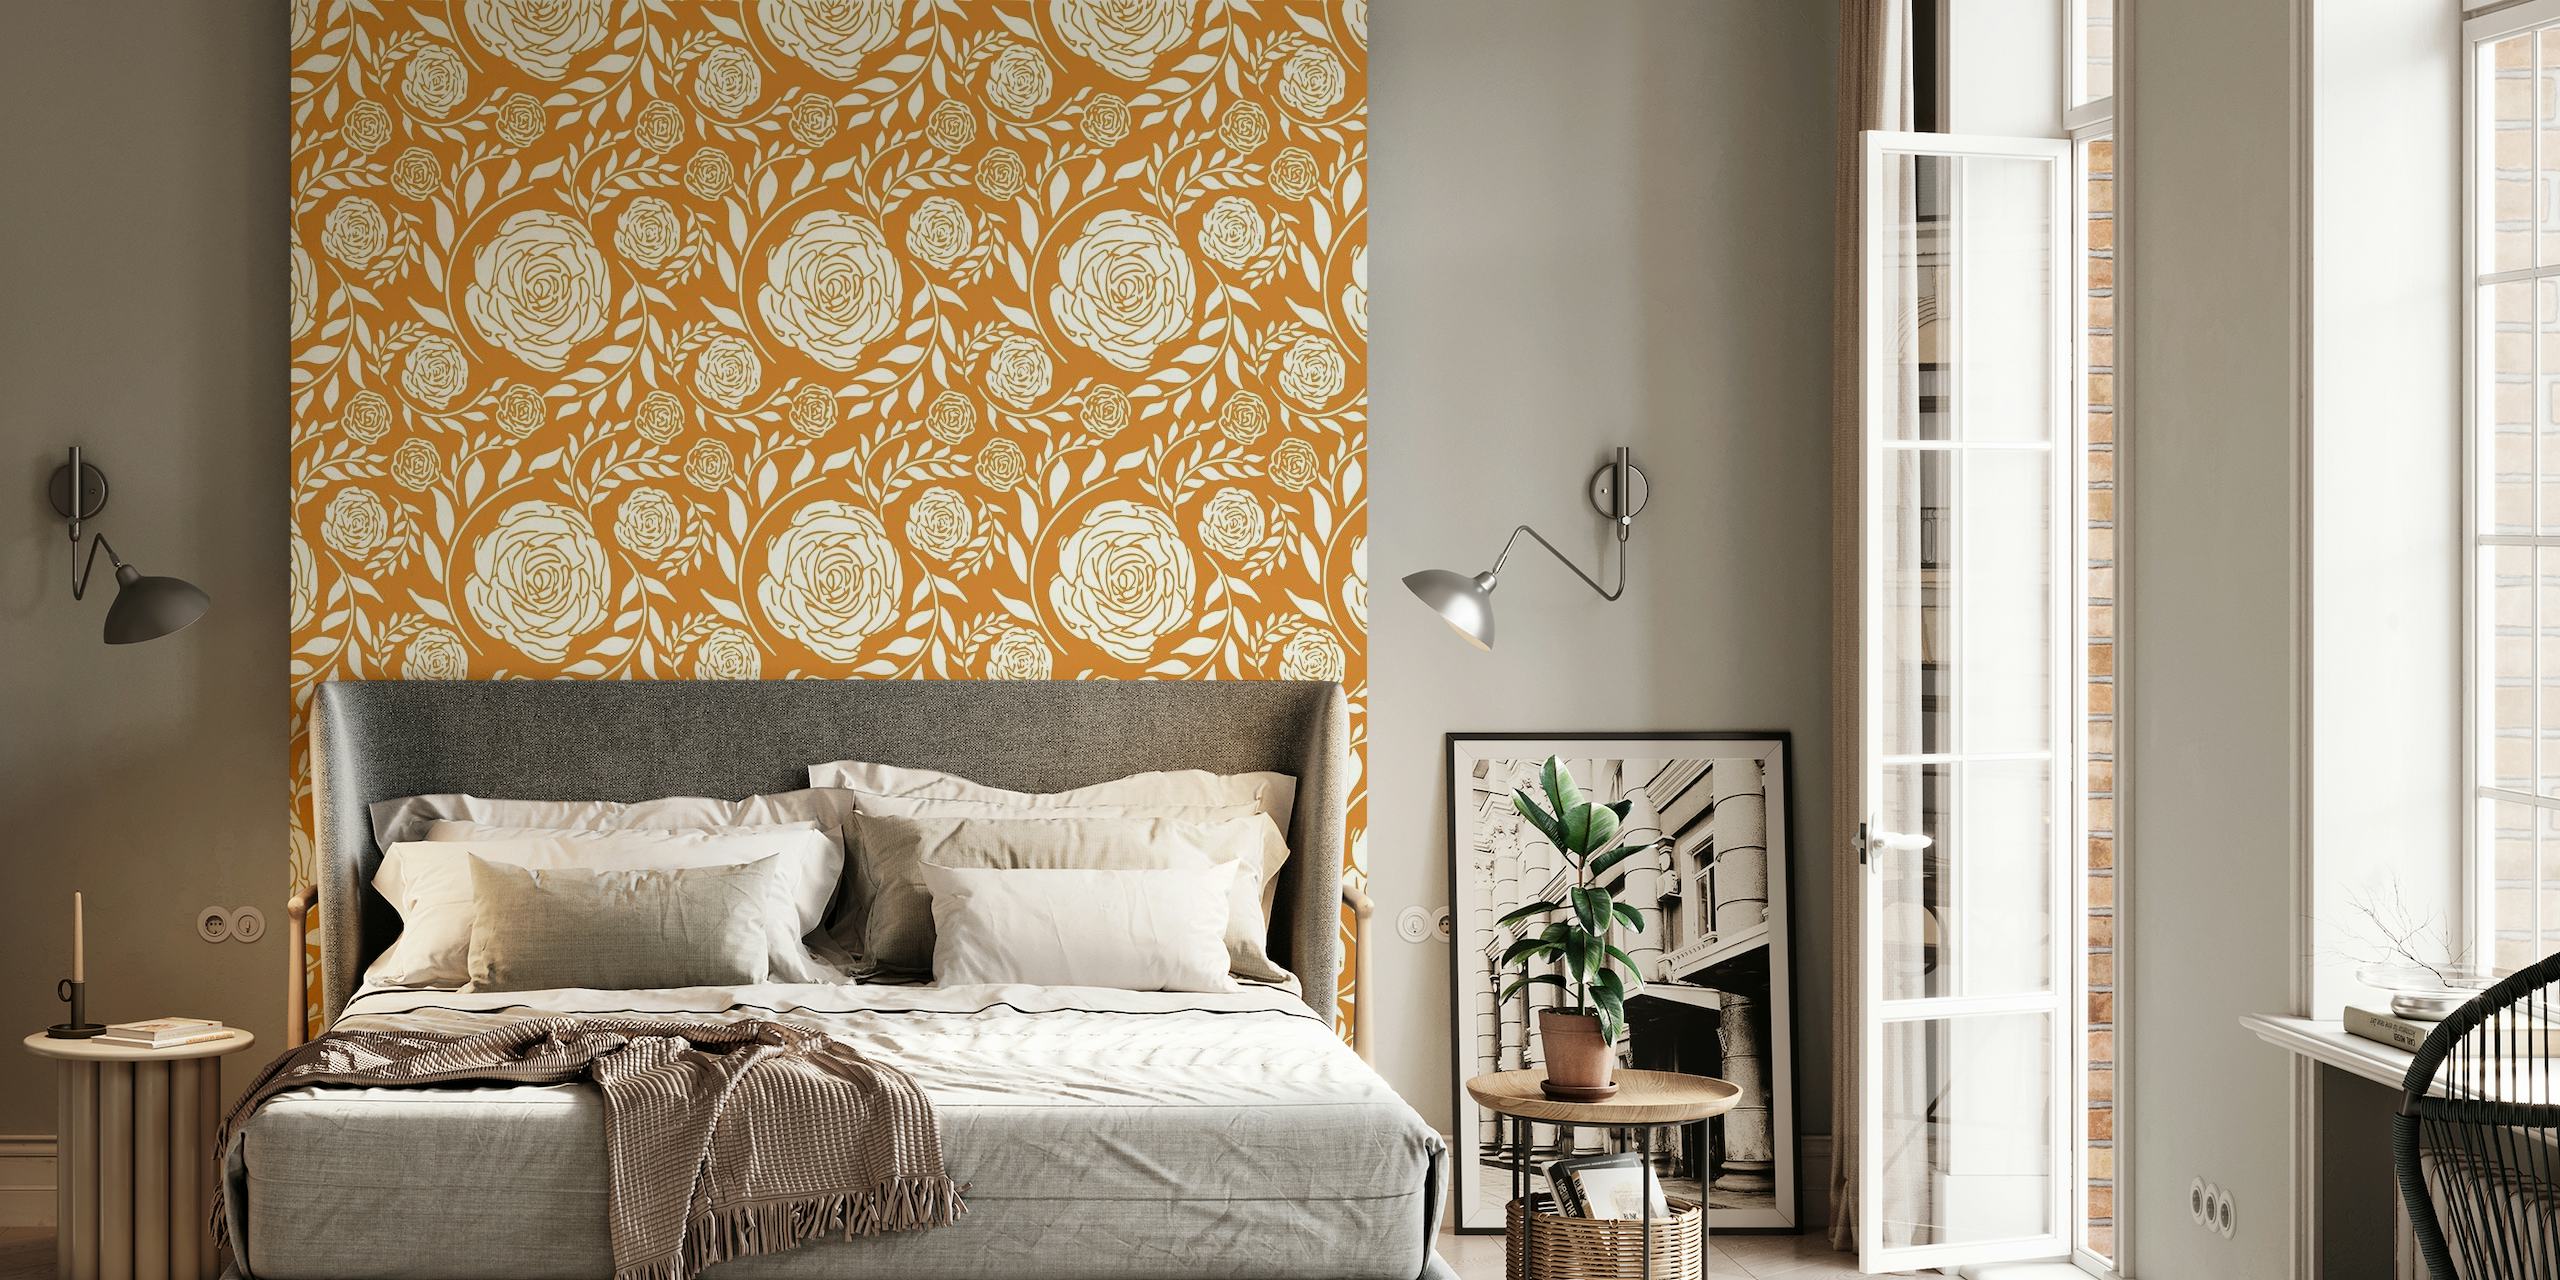 Marigold Rose floral pattern wall mural with rose silhouettes and marigold leaves